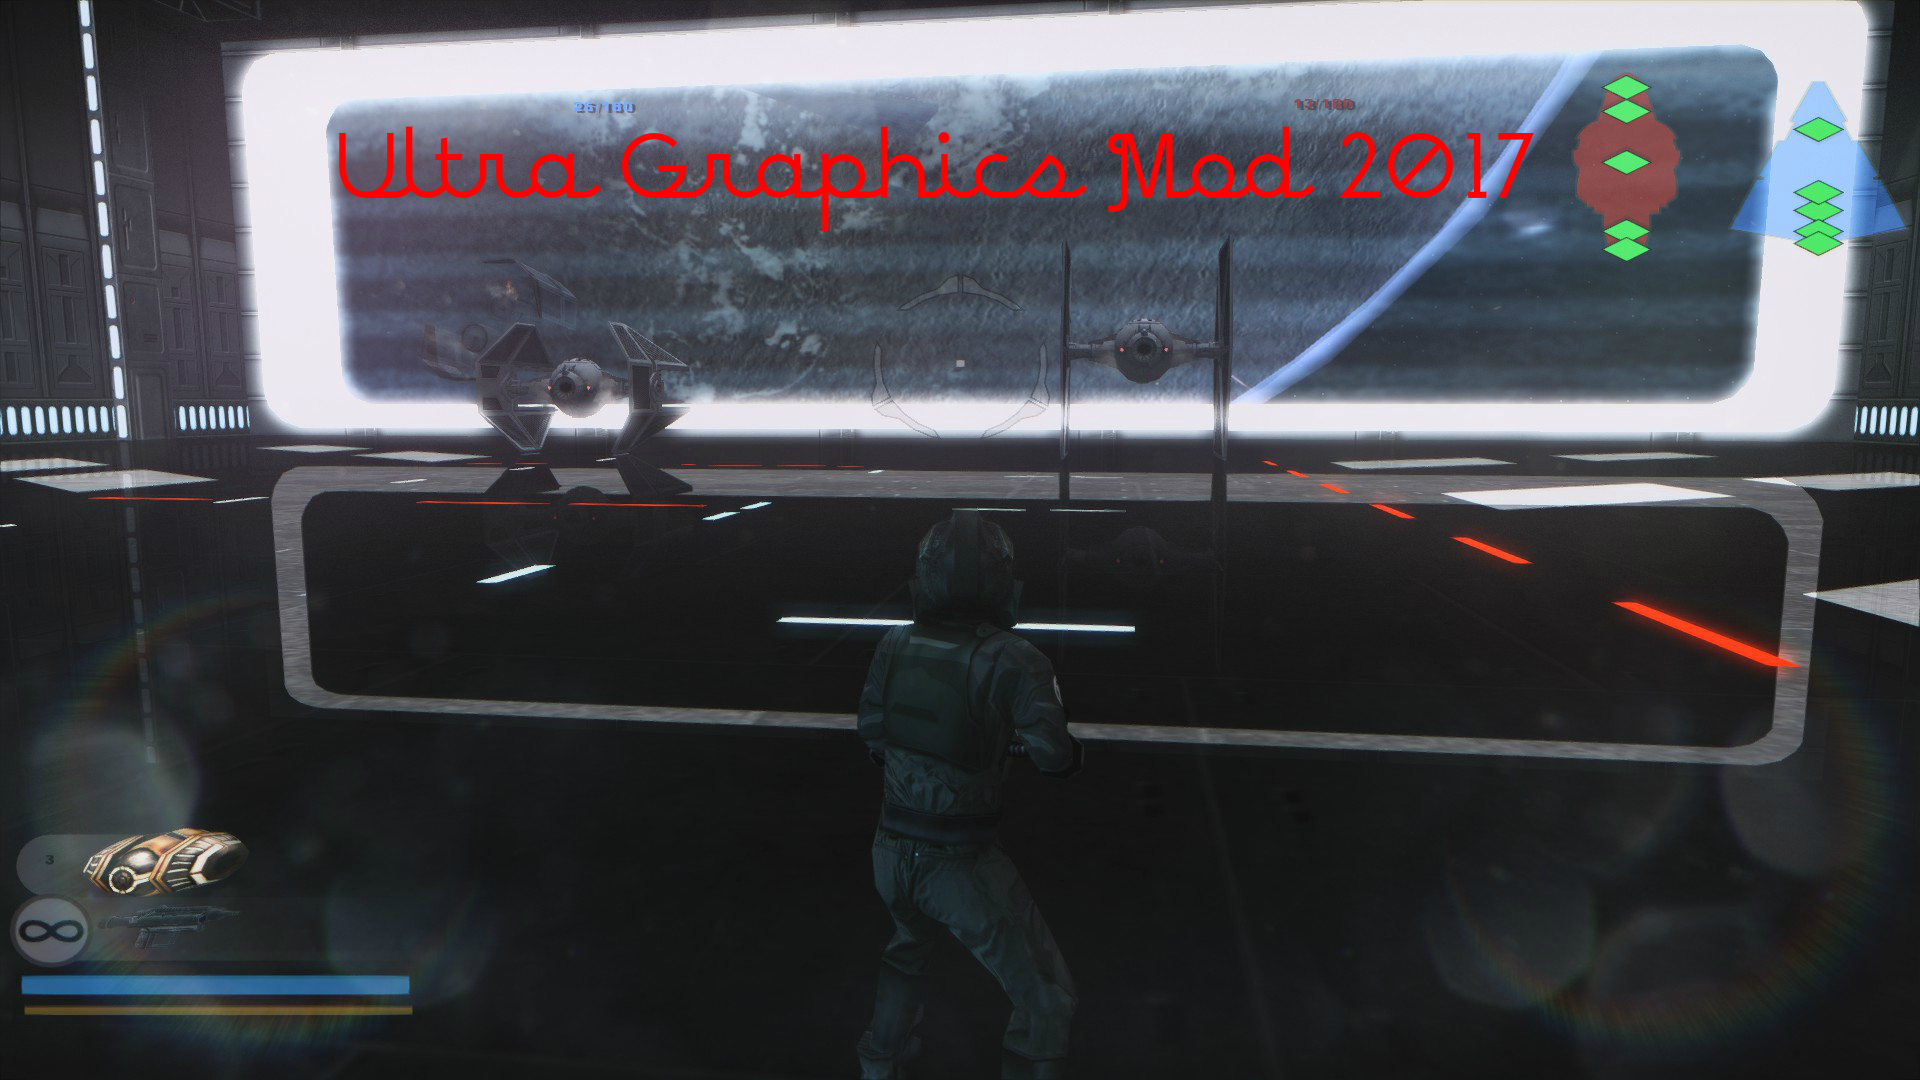 star wars battlefront 2 graphics mod how to fix it to load